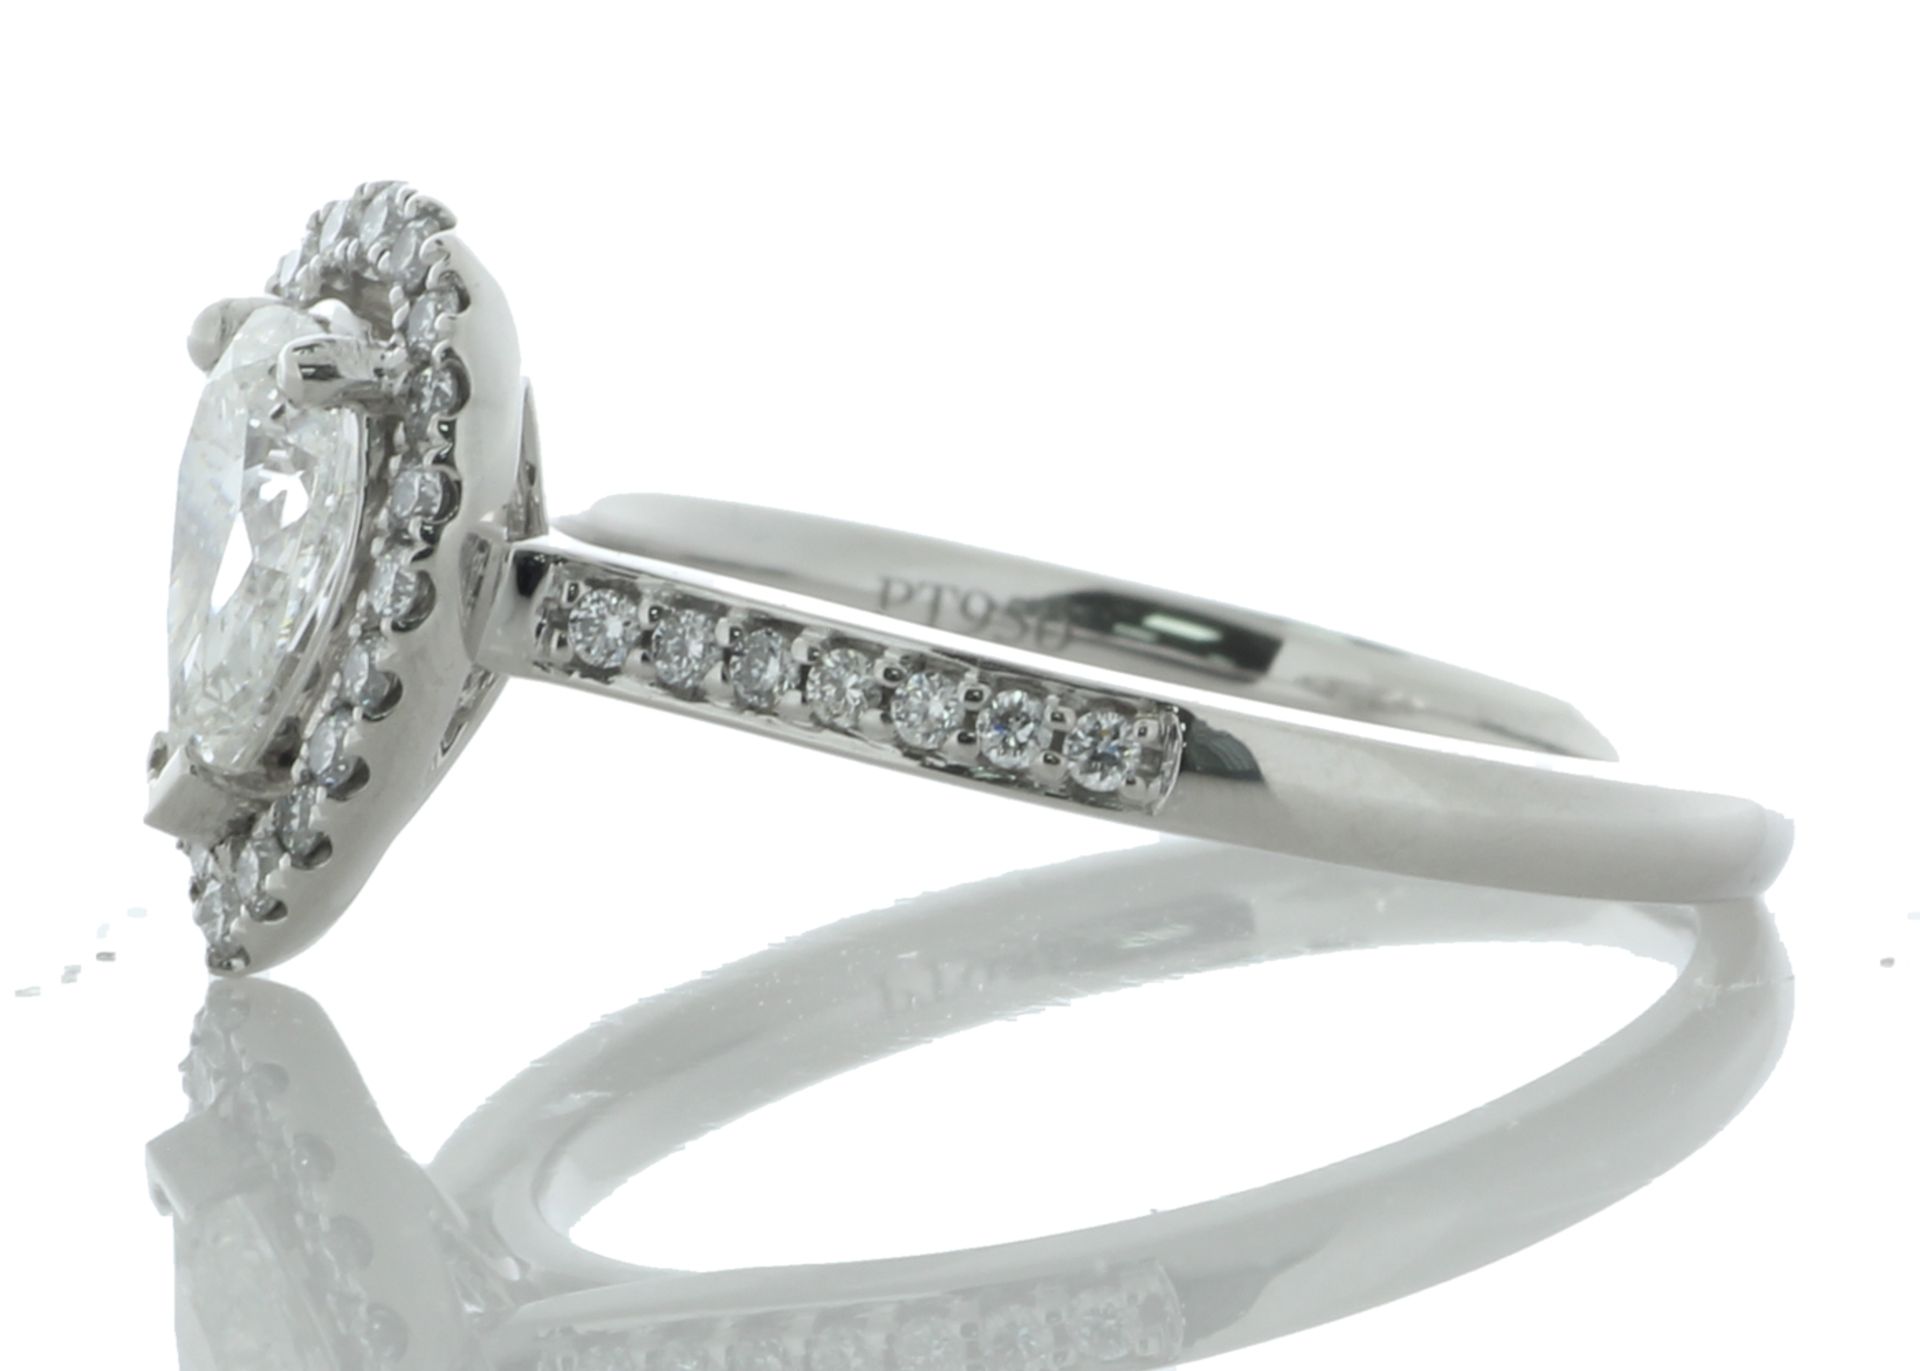 Platinum Single Stone Pear Cut Diamond Ring (0.49) 0.85 Carats - Valued by GIE £11,245.00 - Platinum - Image 3 of 5